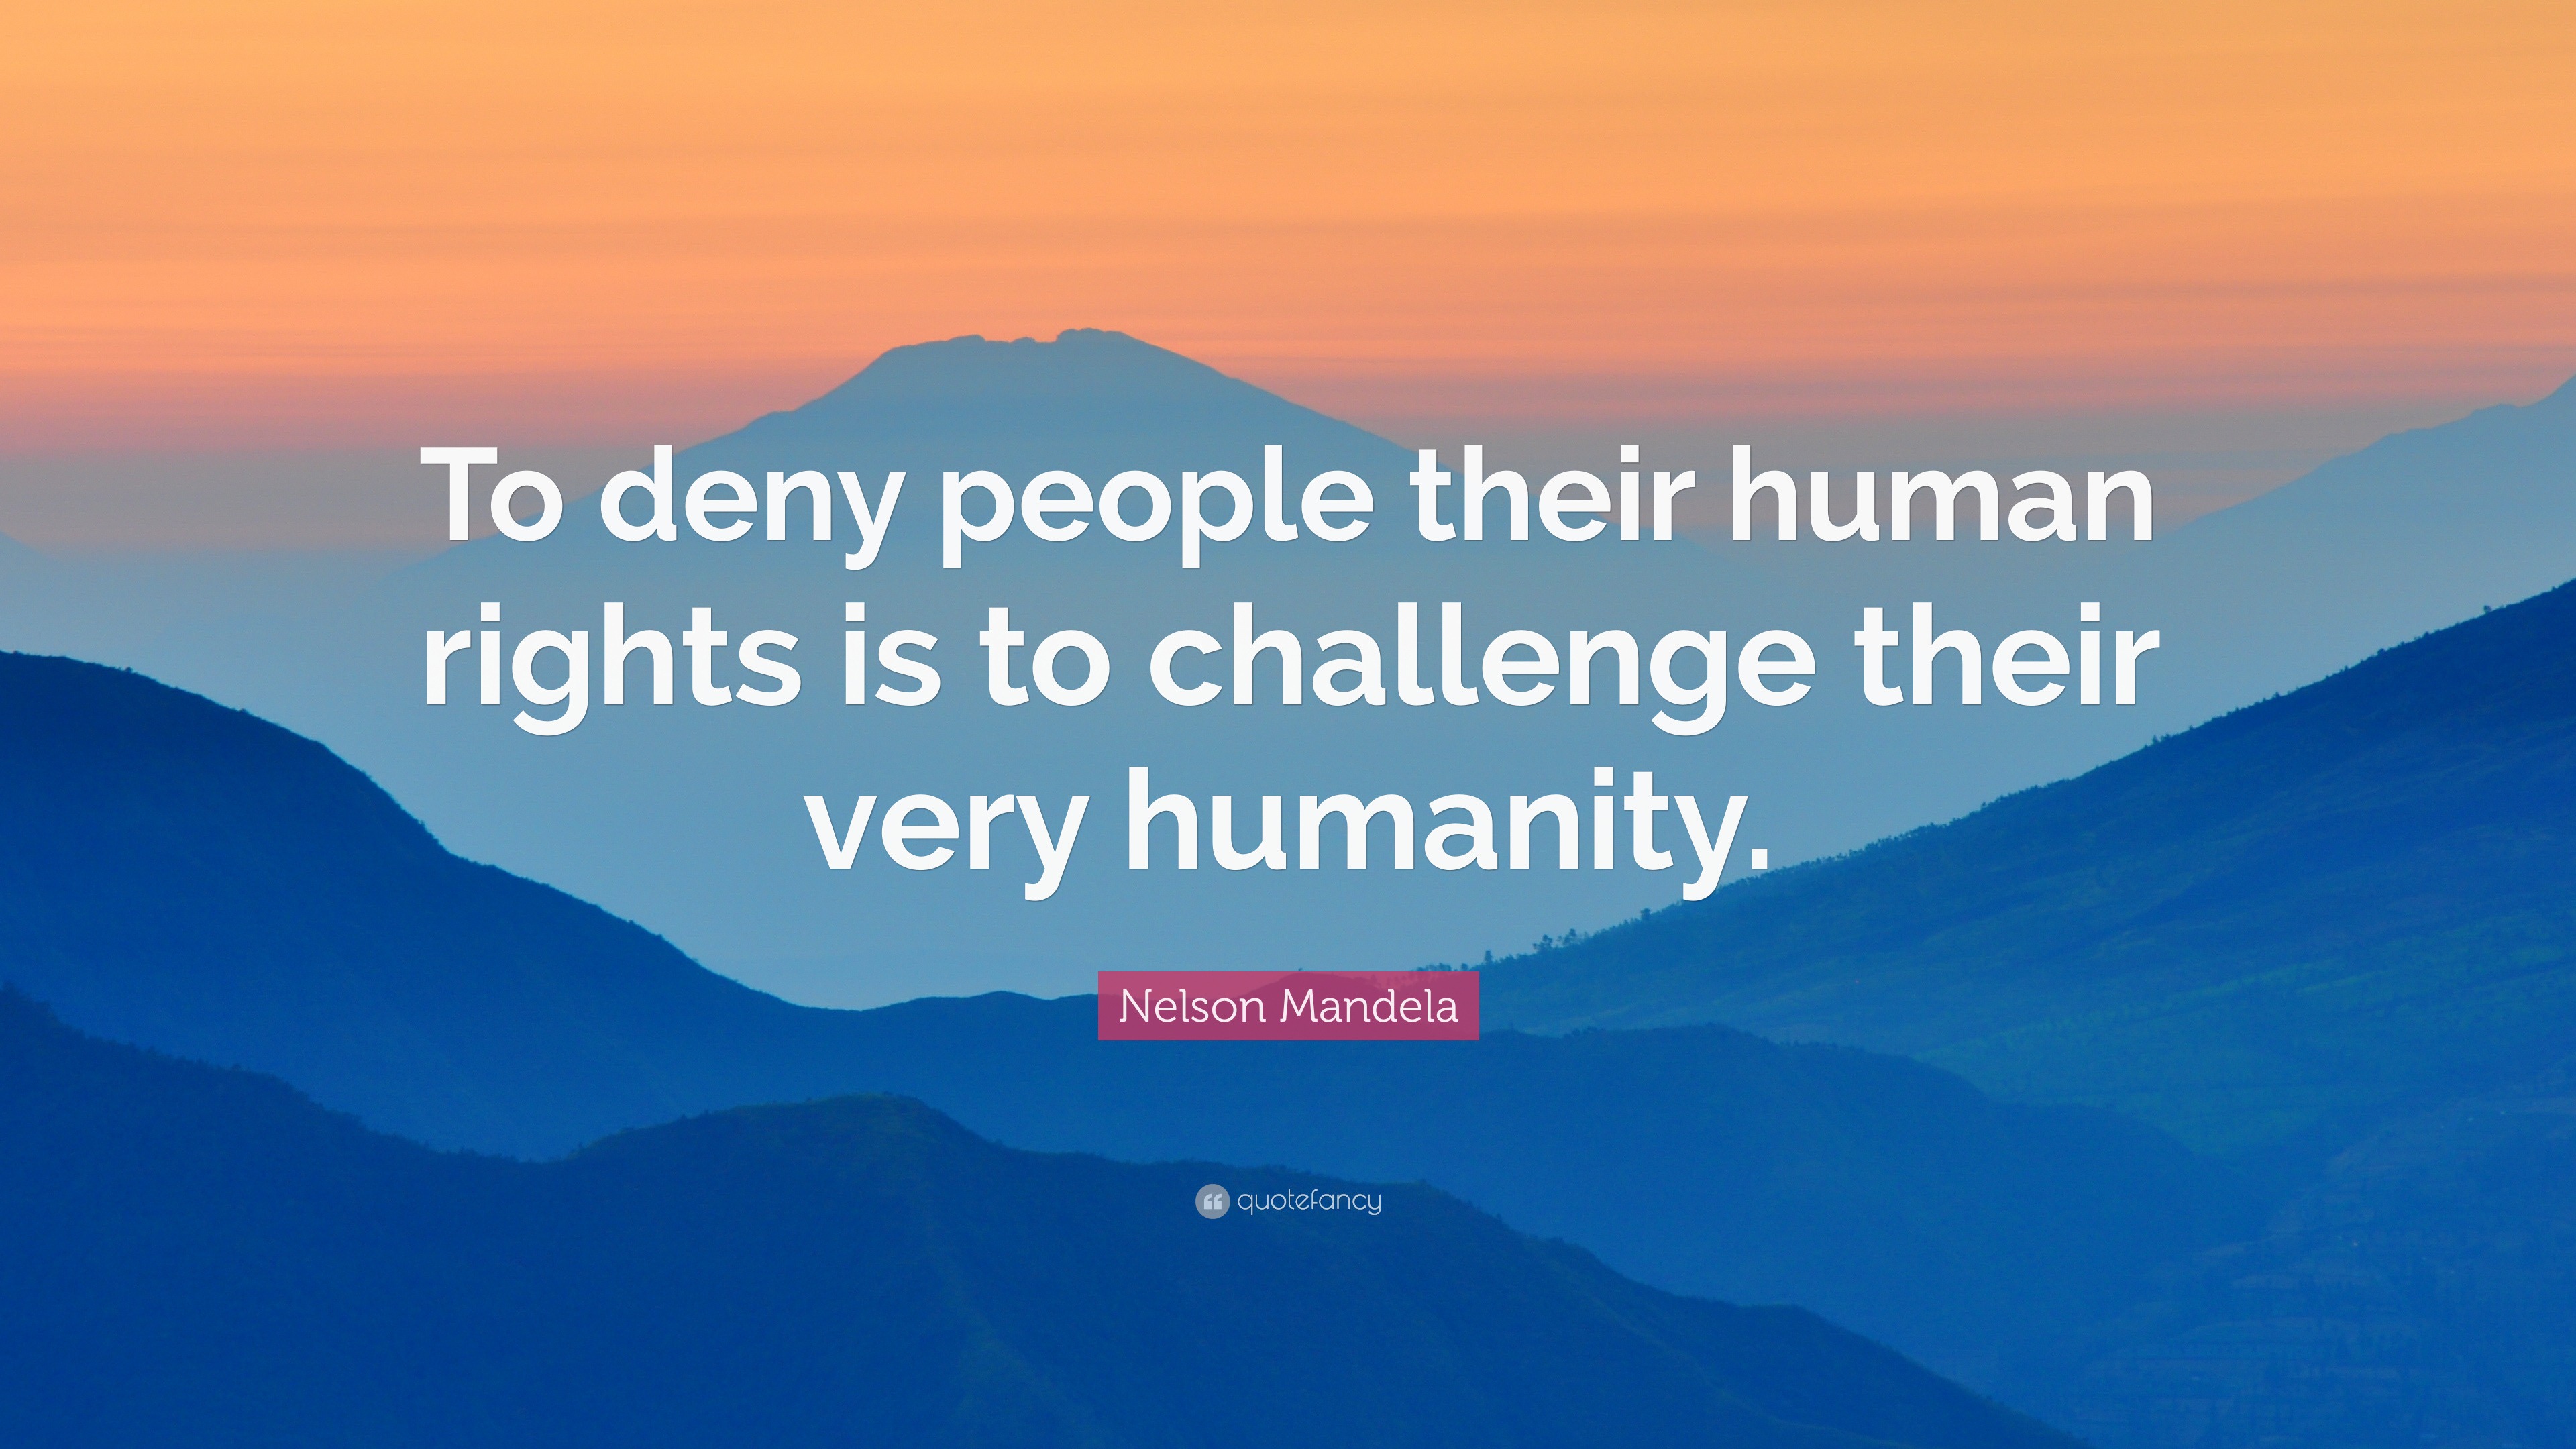 Nelson Mandela Quote: “To deny people their human rights is to